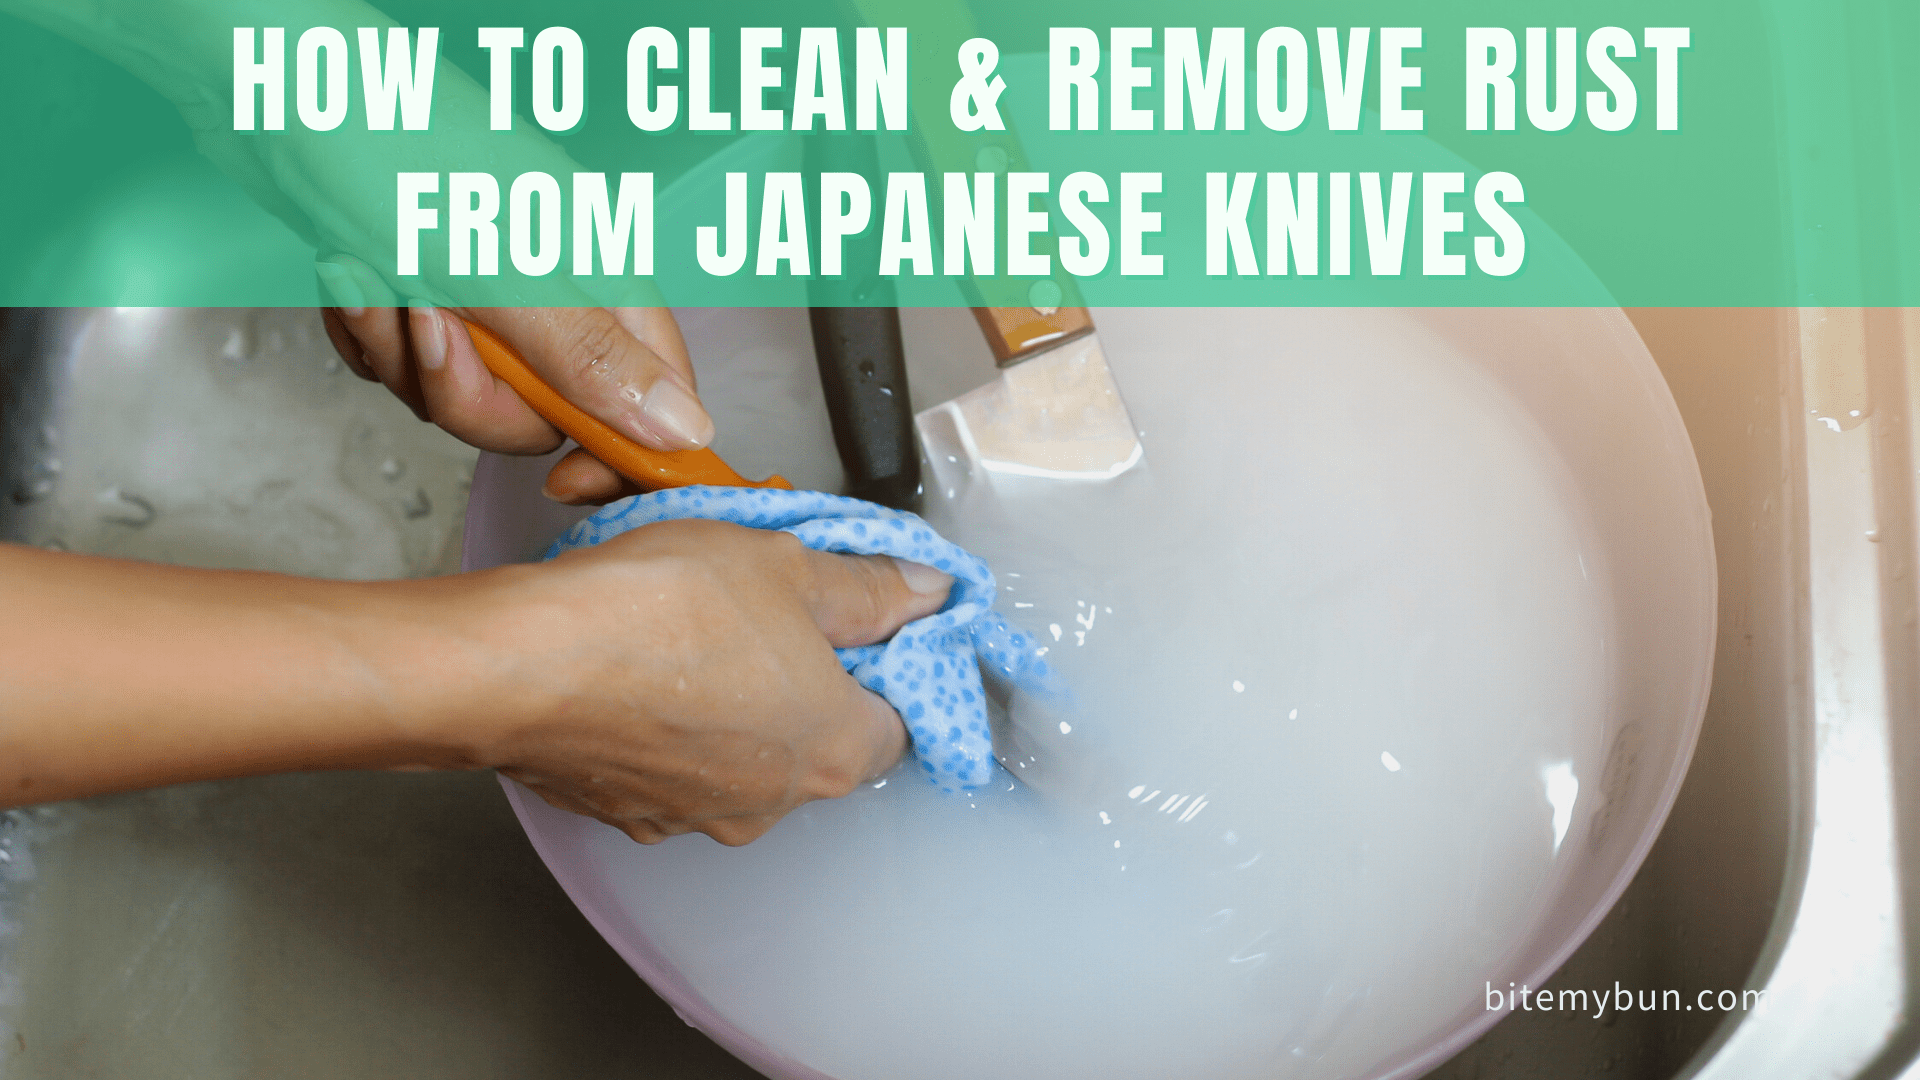 How to clean & remove rust from Japanese knives [simple tricks]